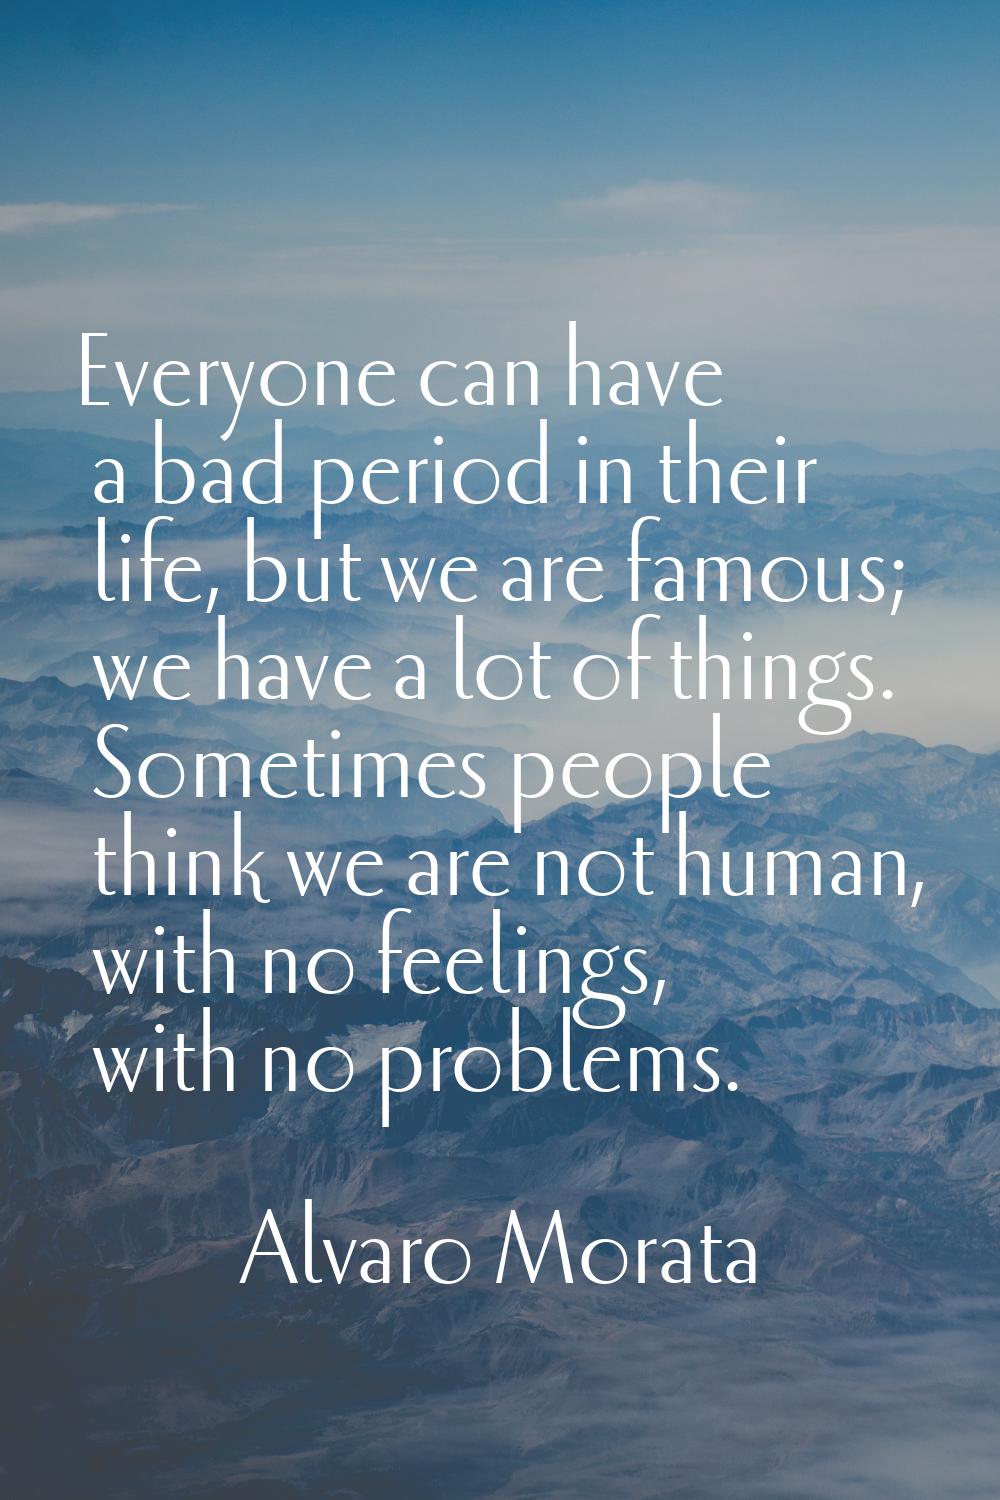 Everyone can have a bad period in their life, but we are famous; we have a lot of things. Sometimes